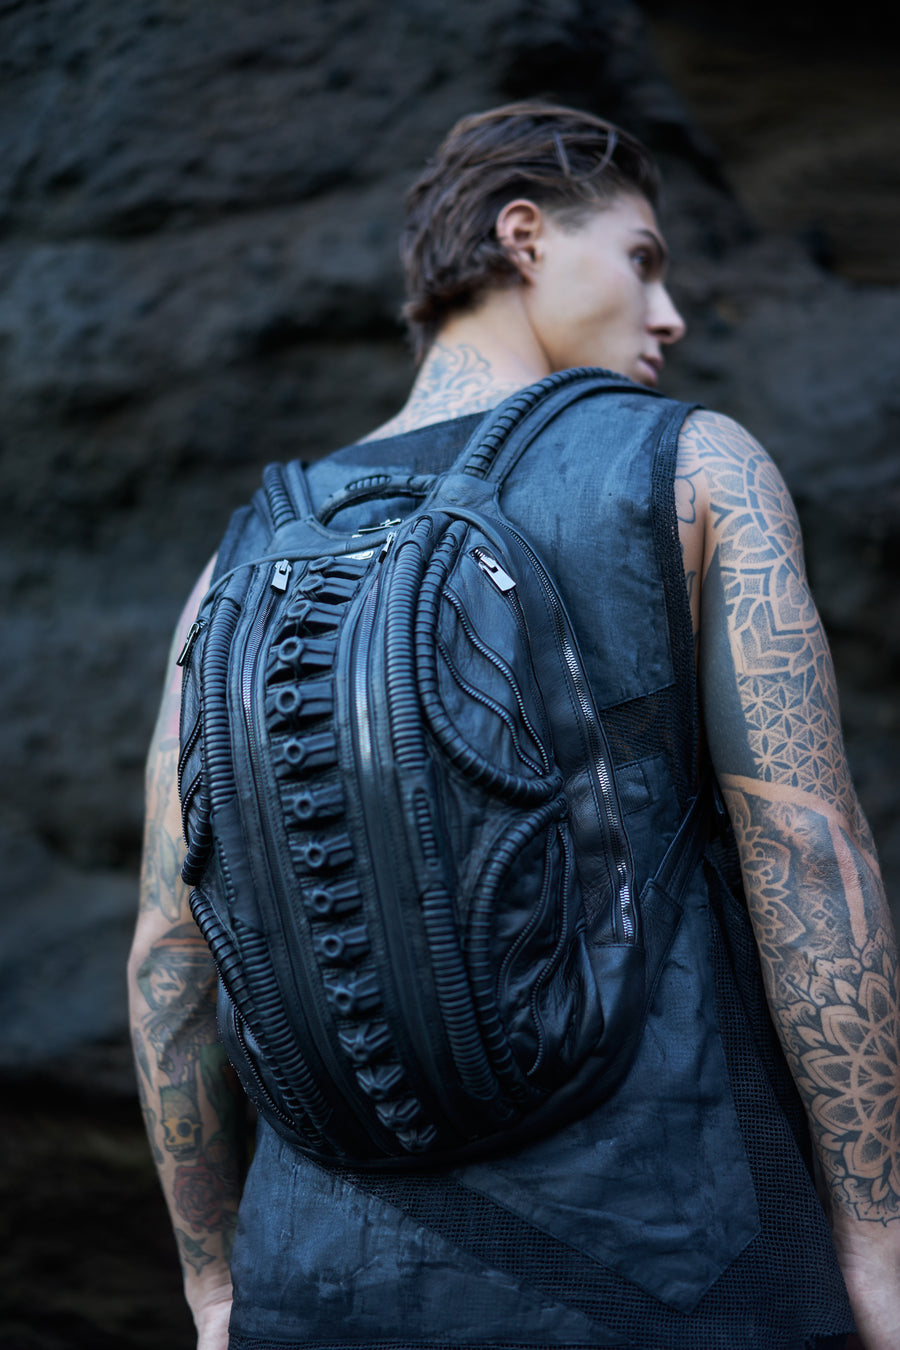 avant-garde leather backpack with biomorphic alien design aesthetic in post-apocalyptic dark fashion